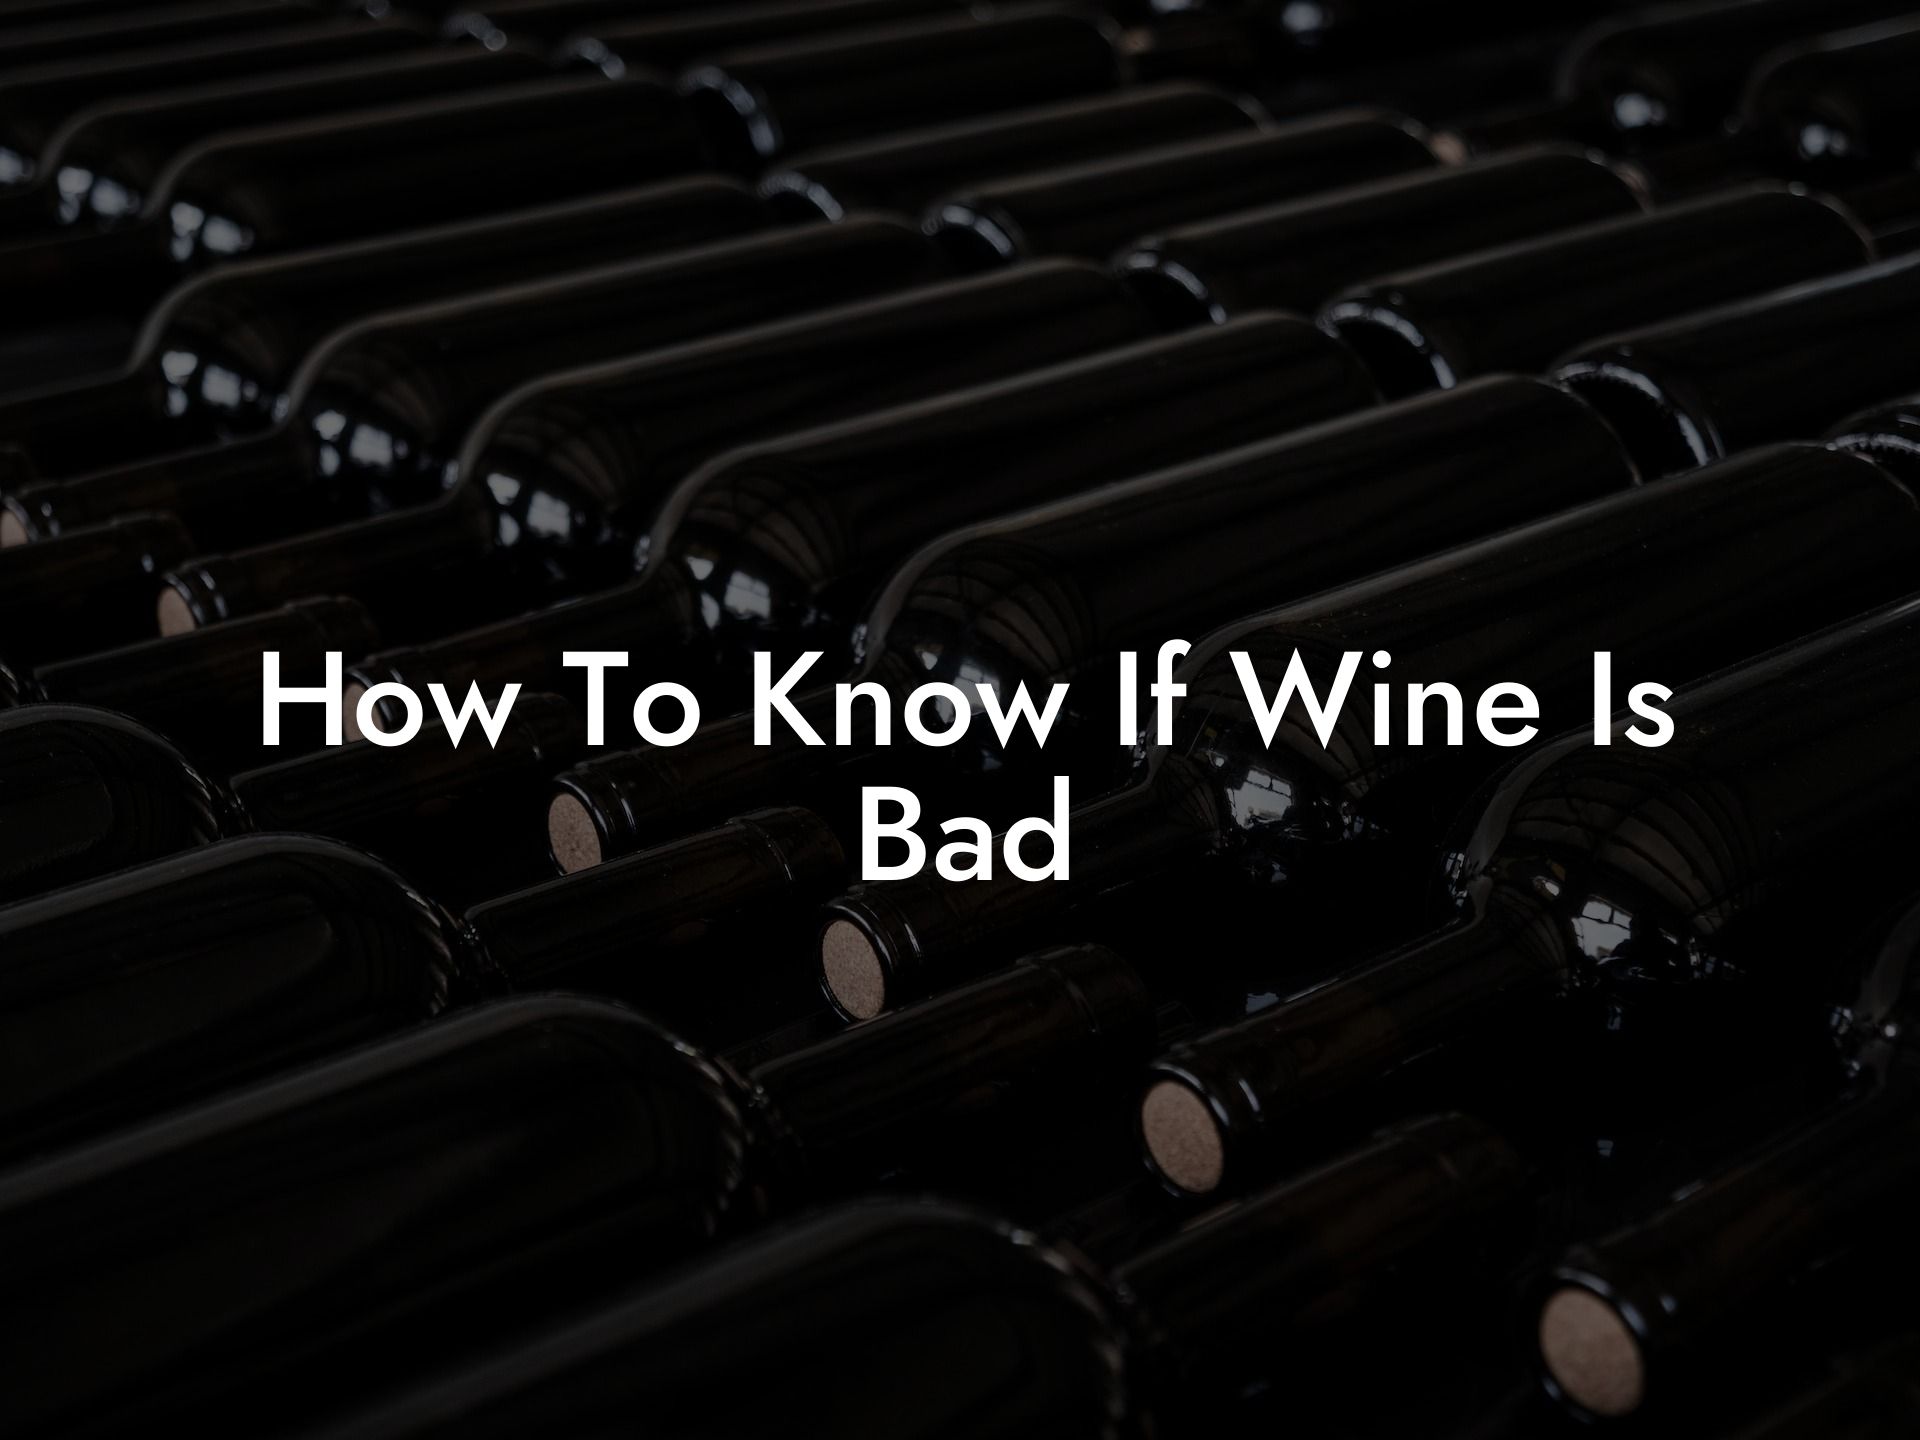 How To Know If Wine Is Bad